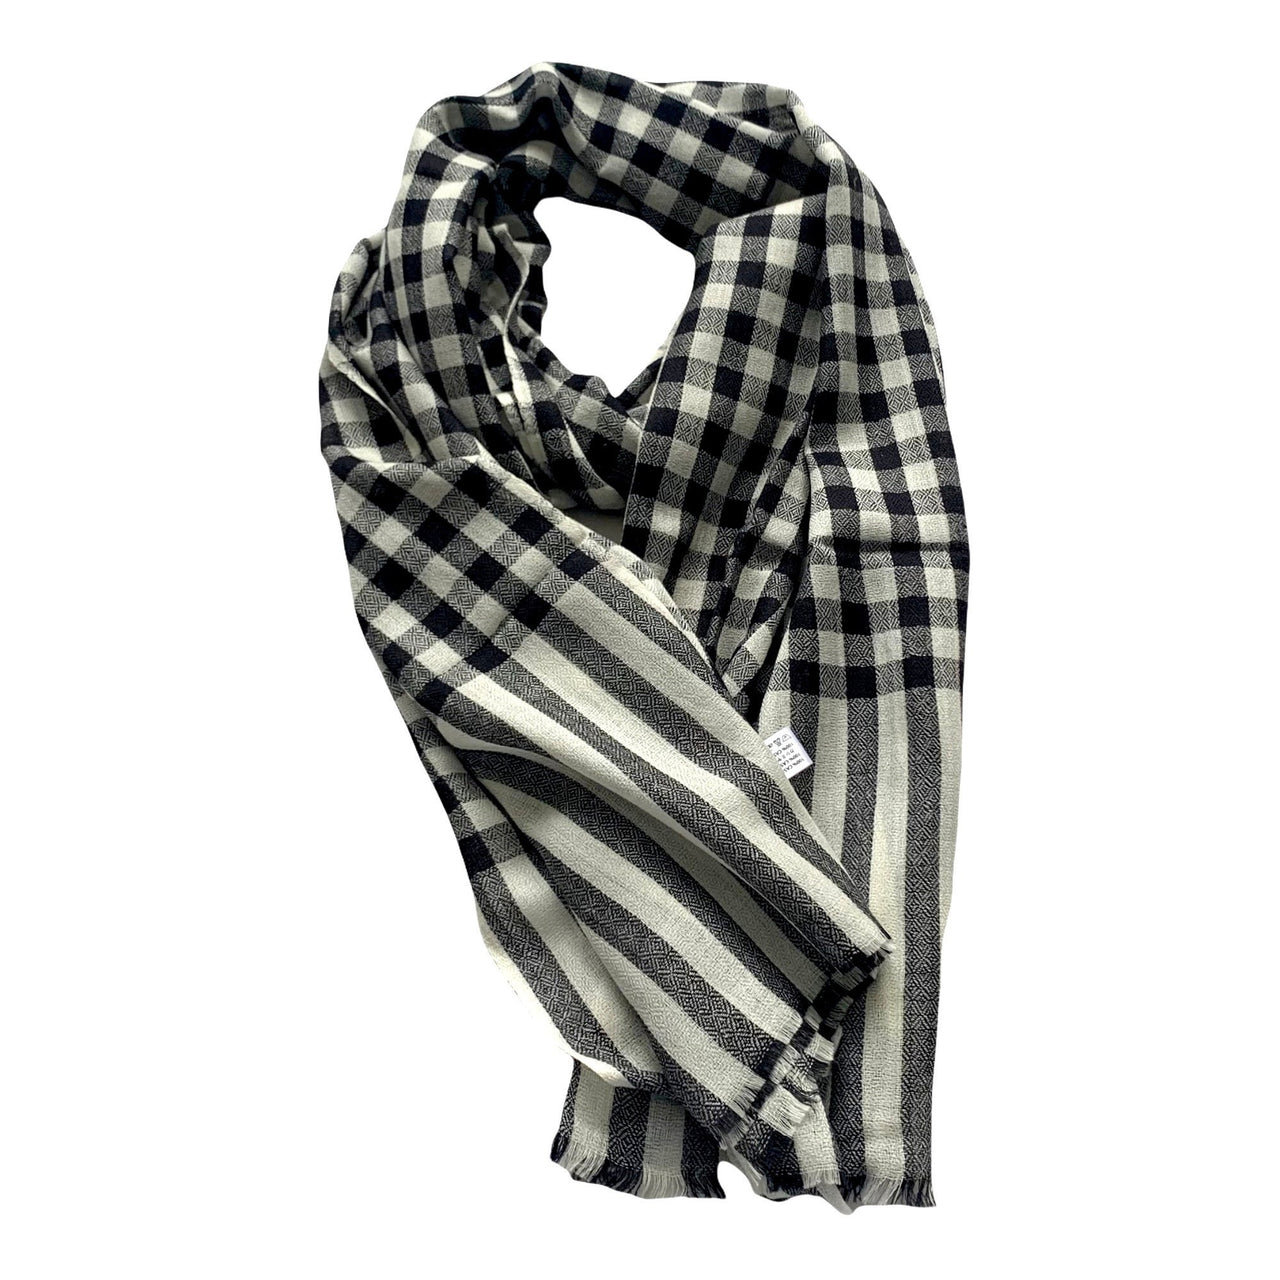 Black and white Cashmere Shawl Scarf Wrap Stole Ultra-soft, lightweight Extremely Warm